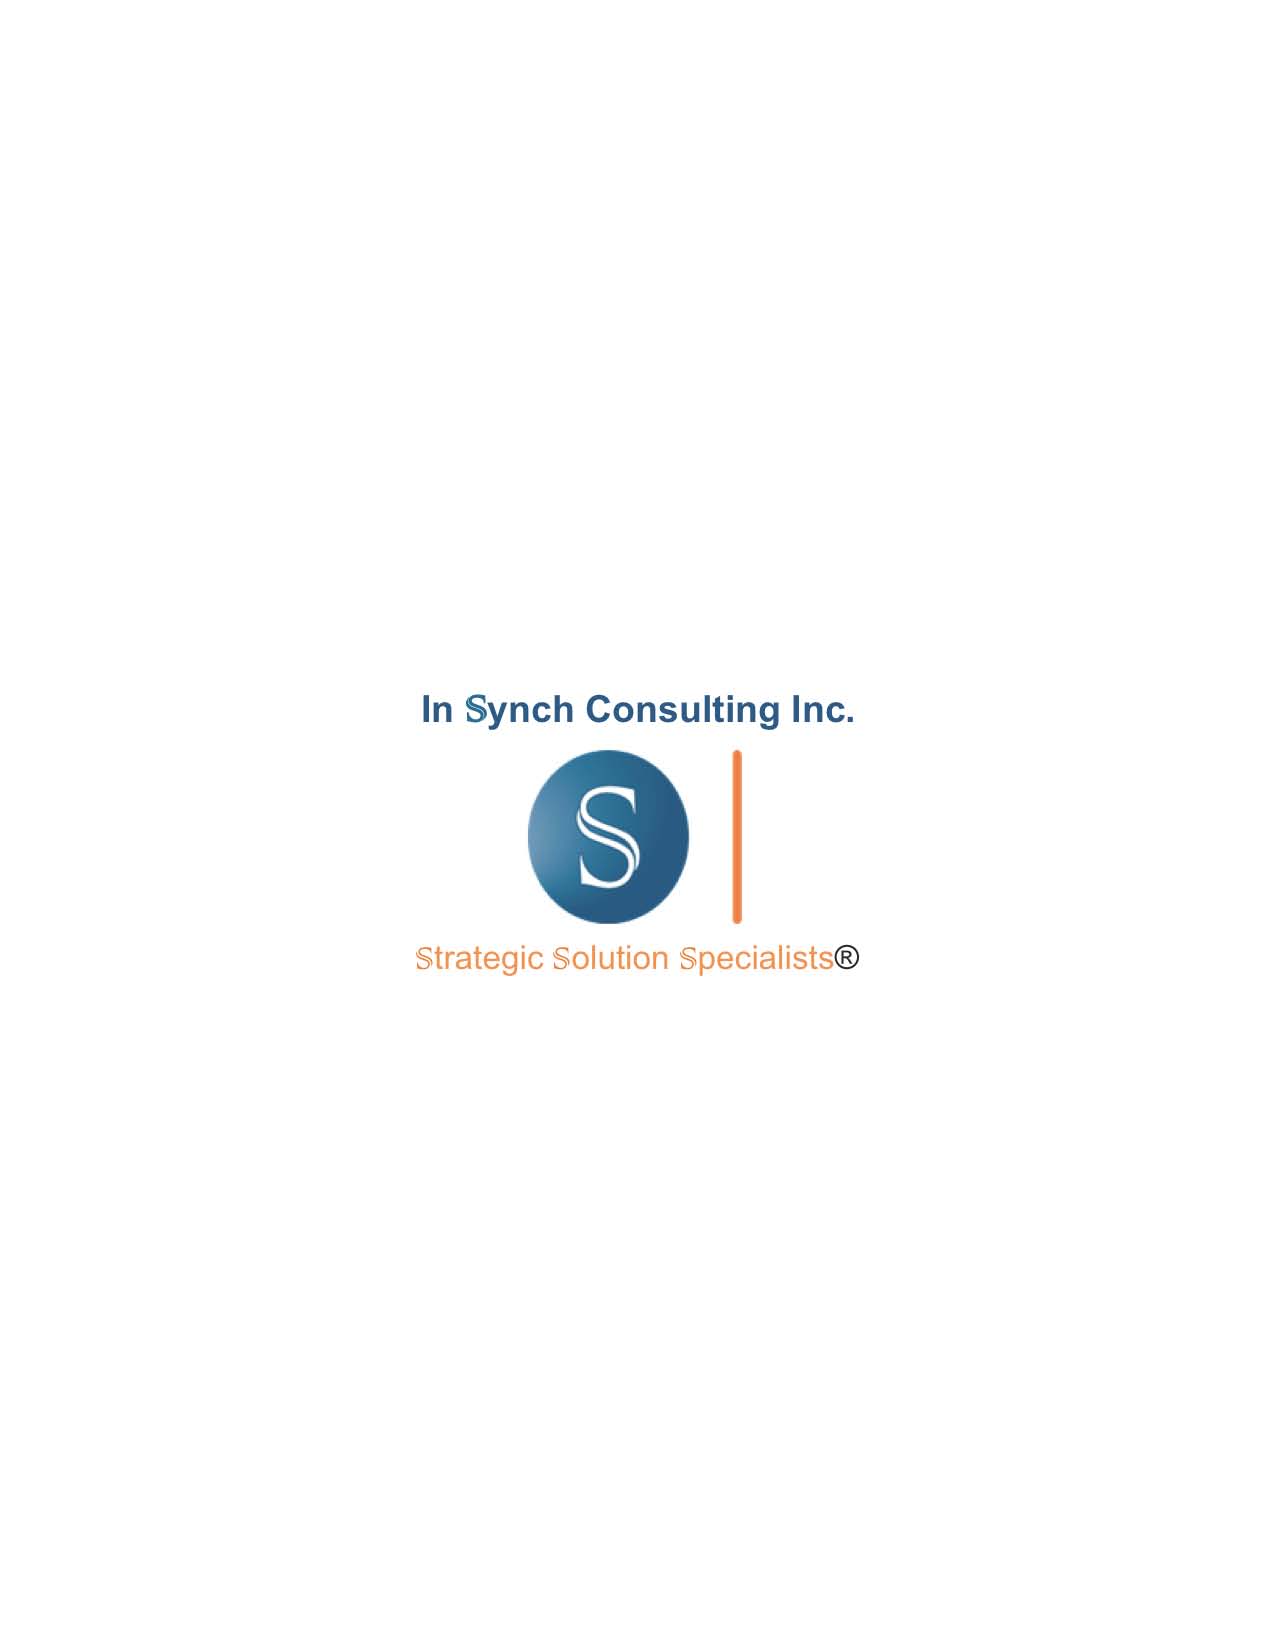 In Synch Consulting Inc.